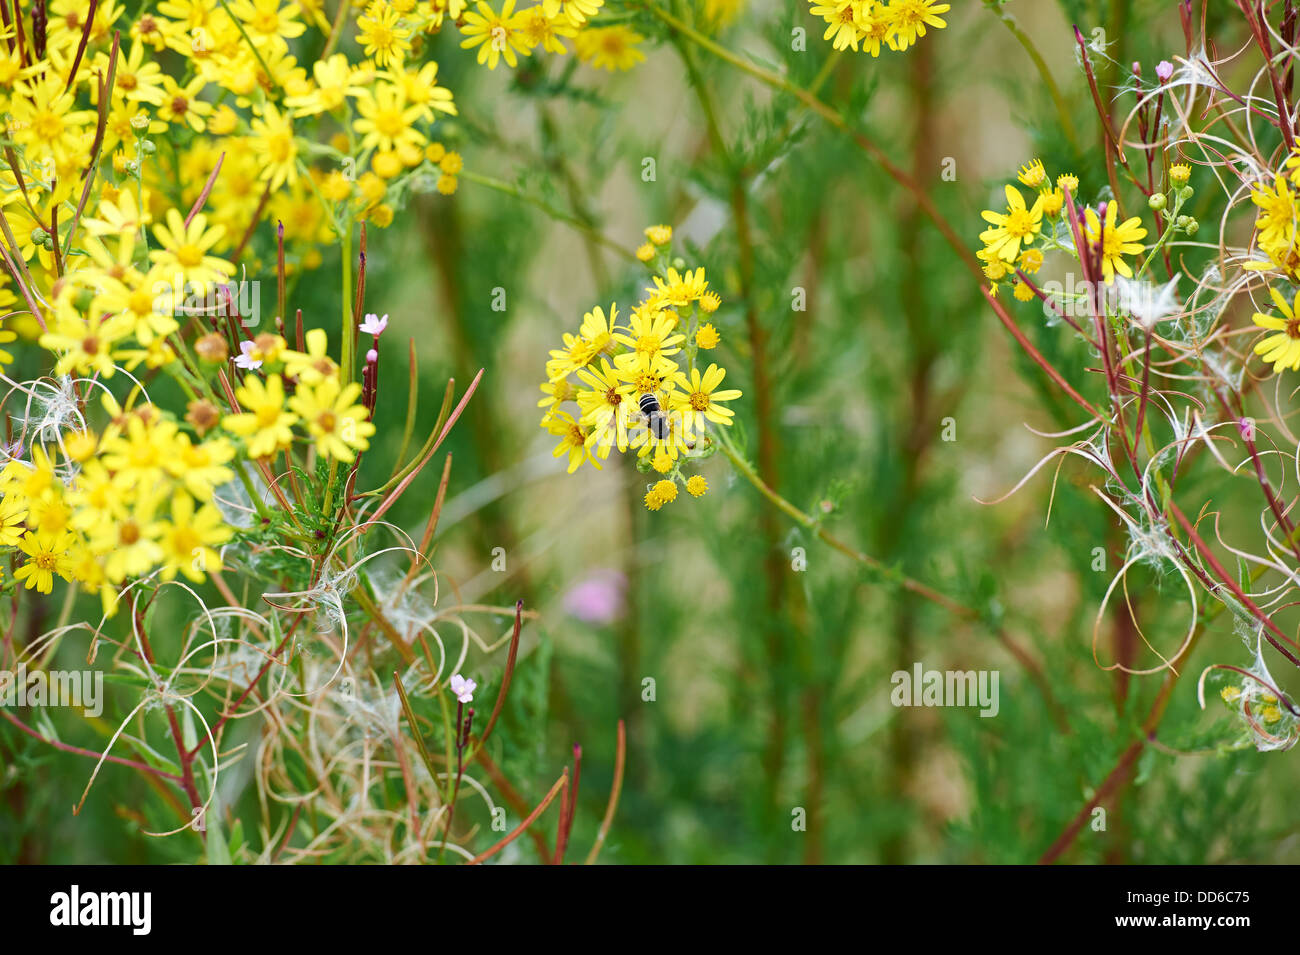 Hover-Fly, Syrphus ribesii, Collecting Pollen from Ragwort on Conservation Farm Land. England, UK, 2013. Stock Photo